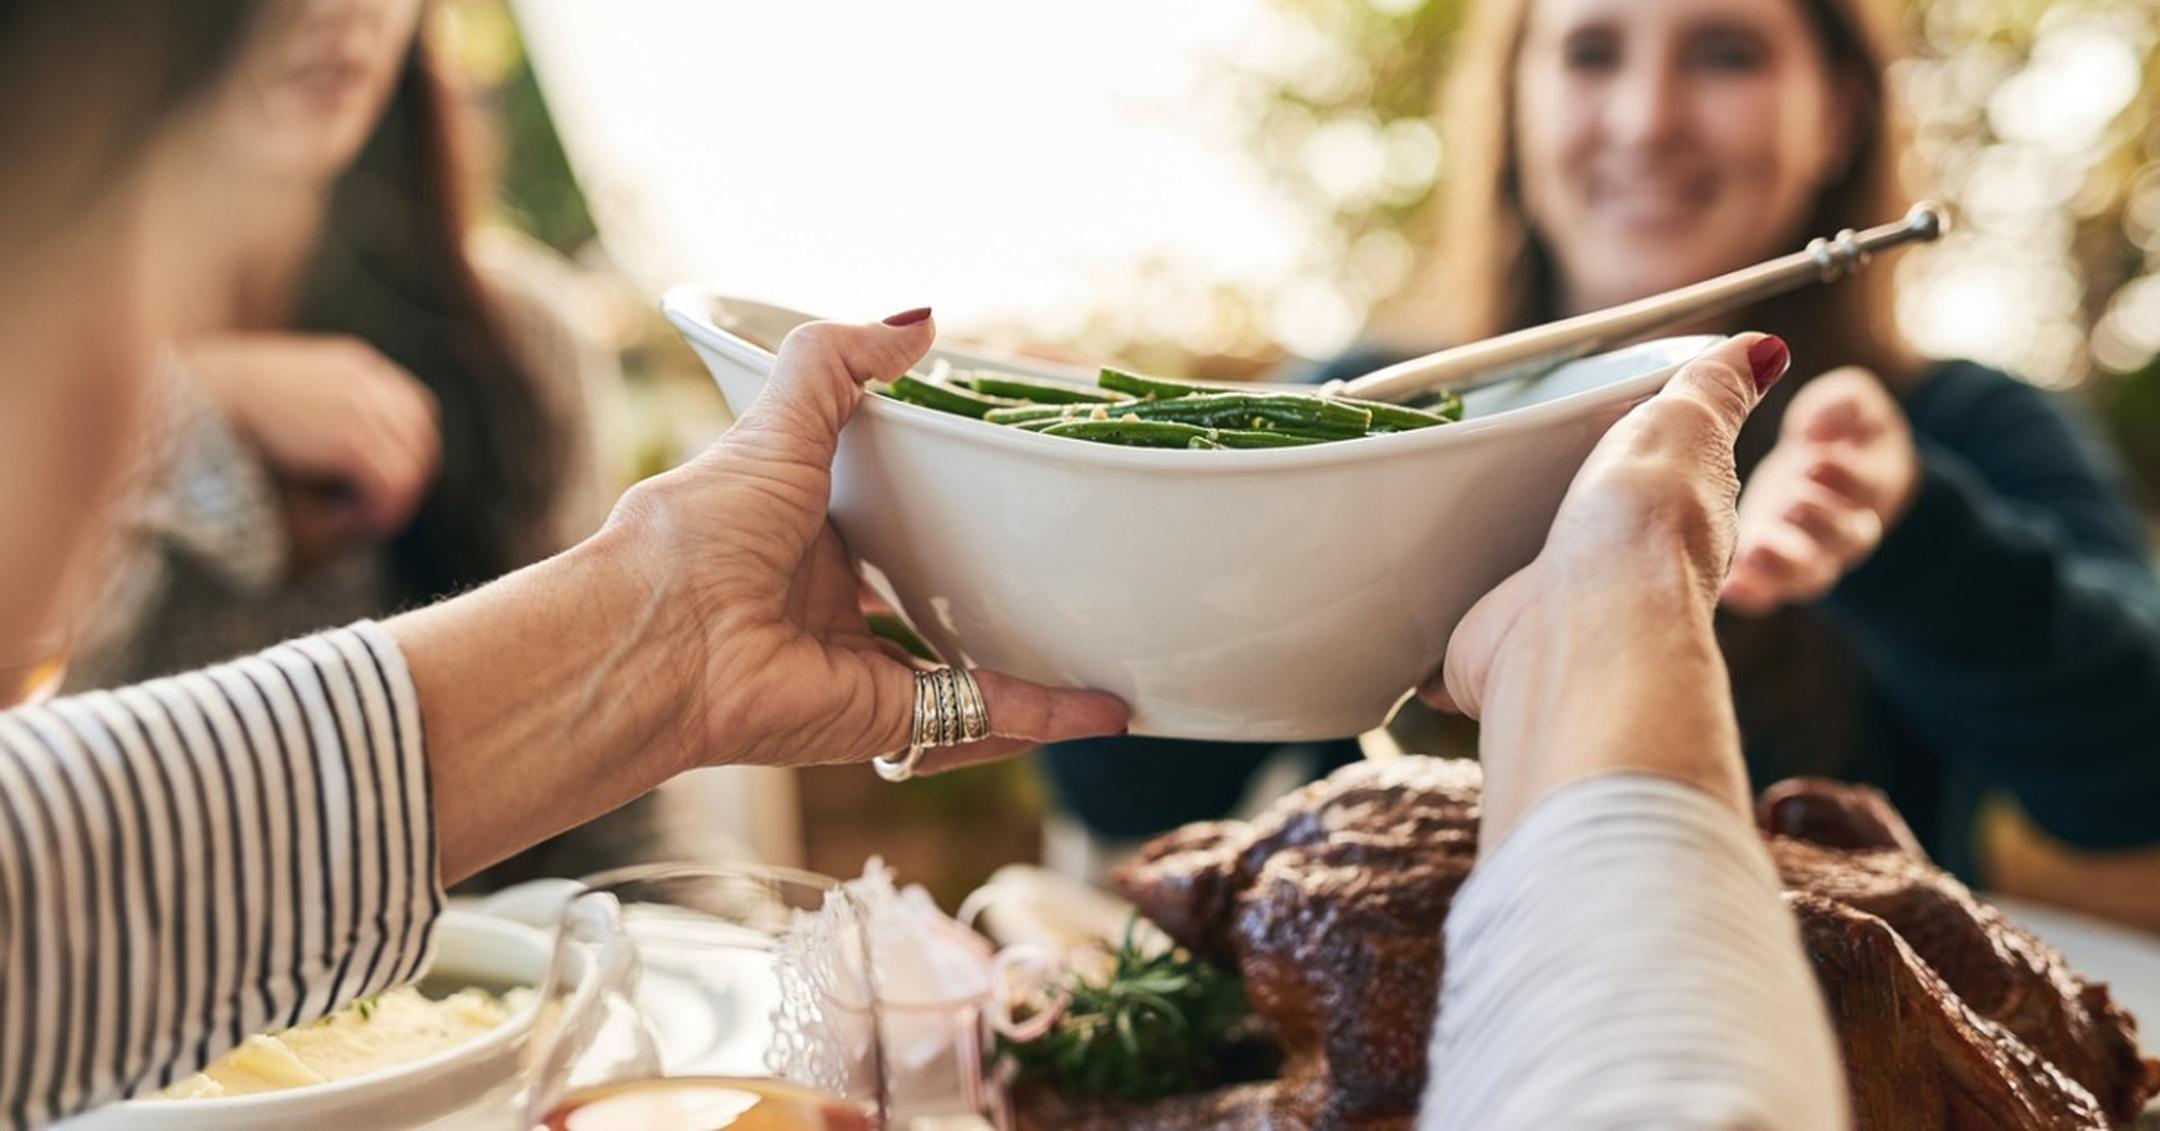 What do you think? Would you charge someone cash for hosting a Christmas lunch that you're picking out the menu for? Or should mother just bite the bullet and foot the bill herself?